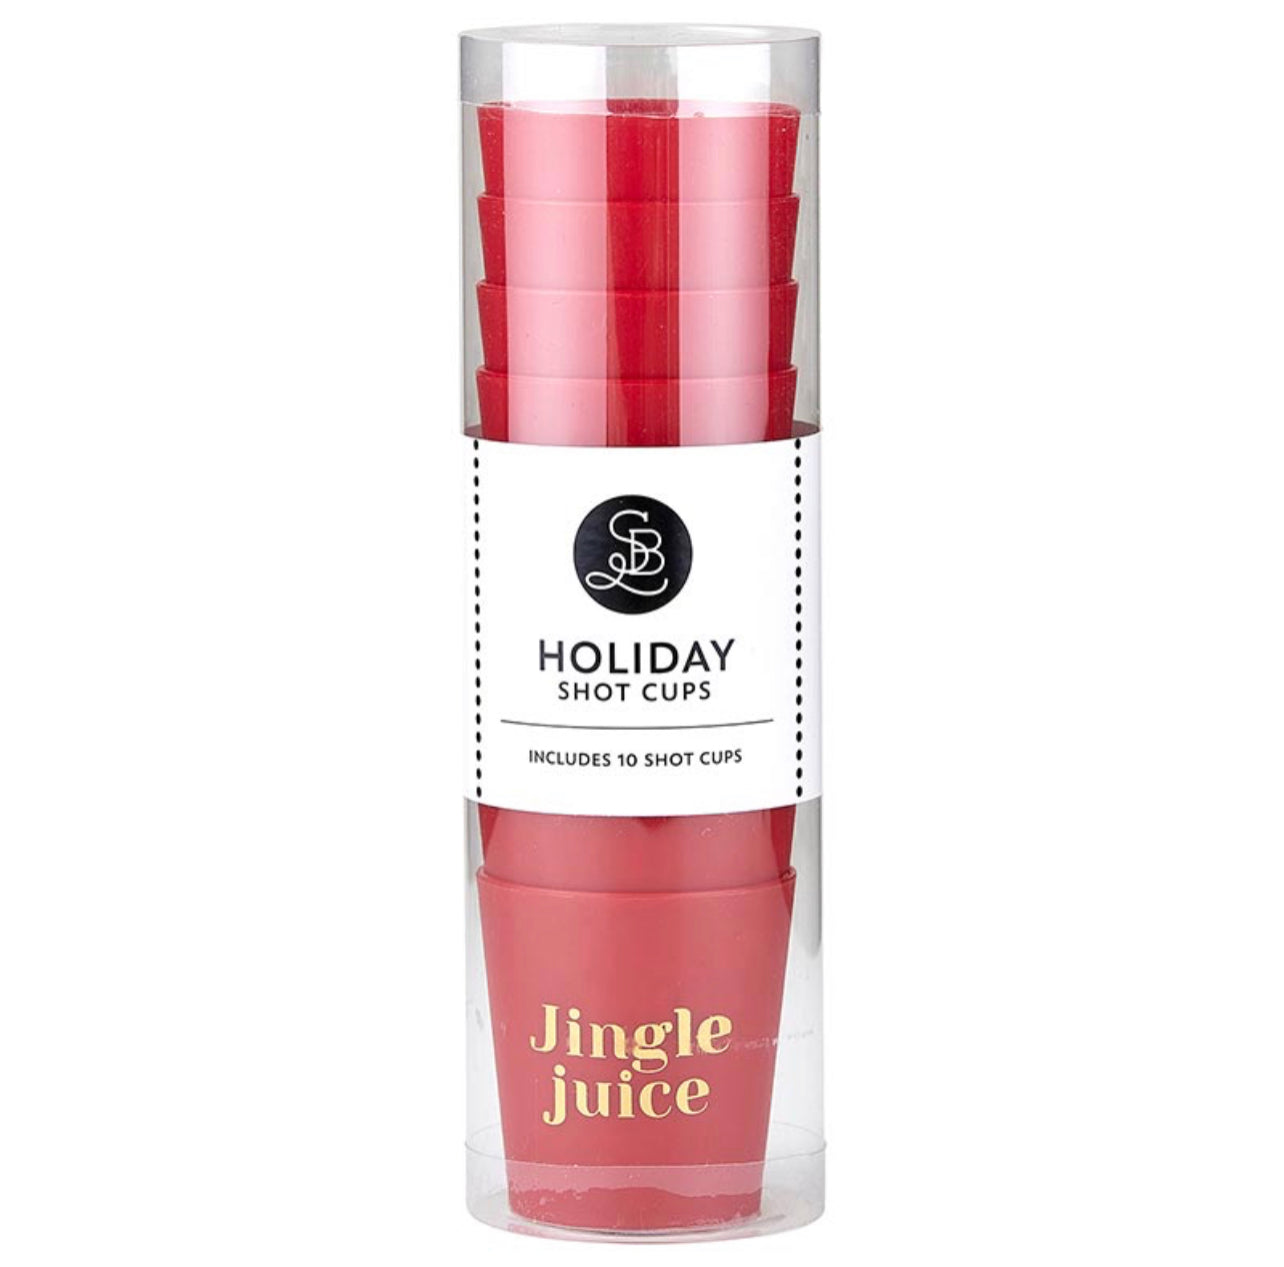 set of 10 reusable red plastic shot cups with words in gold foil that say "jingle juise"